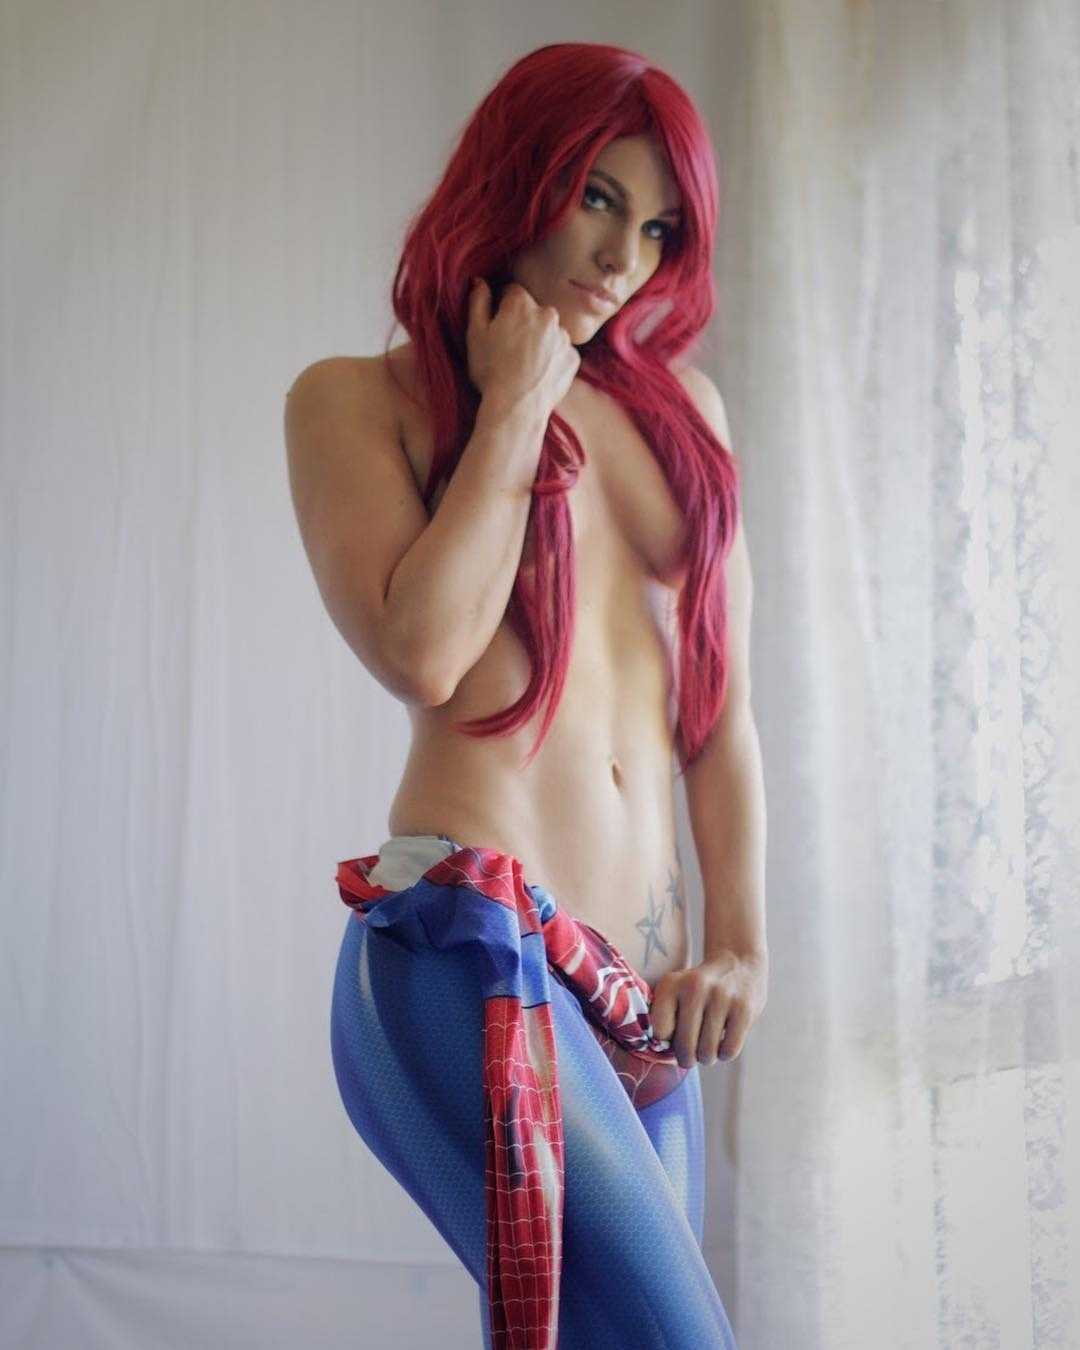 51 Hot Pictures Of Mary Jane Watson Which Demonstrate She Is The Hottest Lady On Earth 495